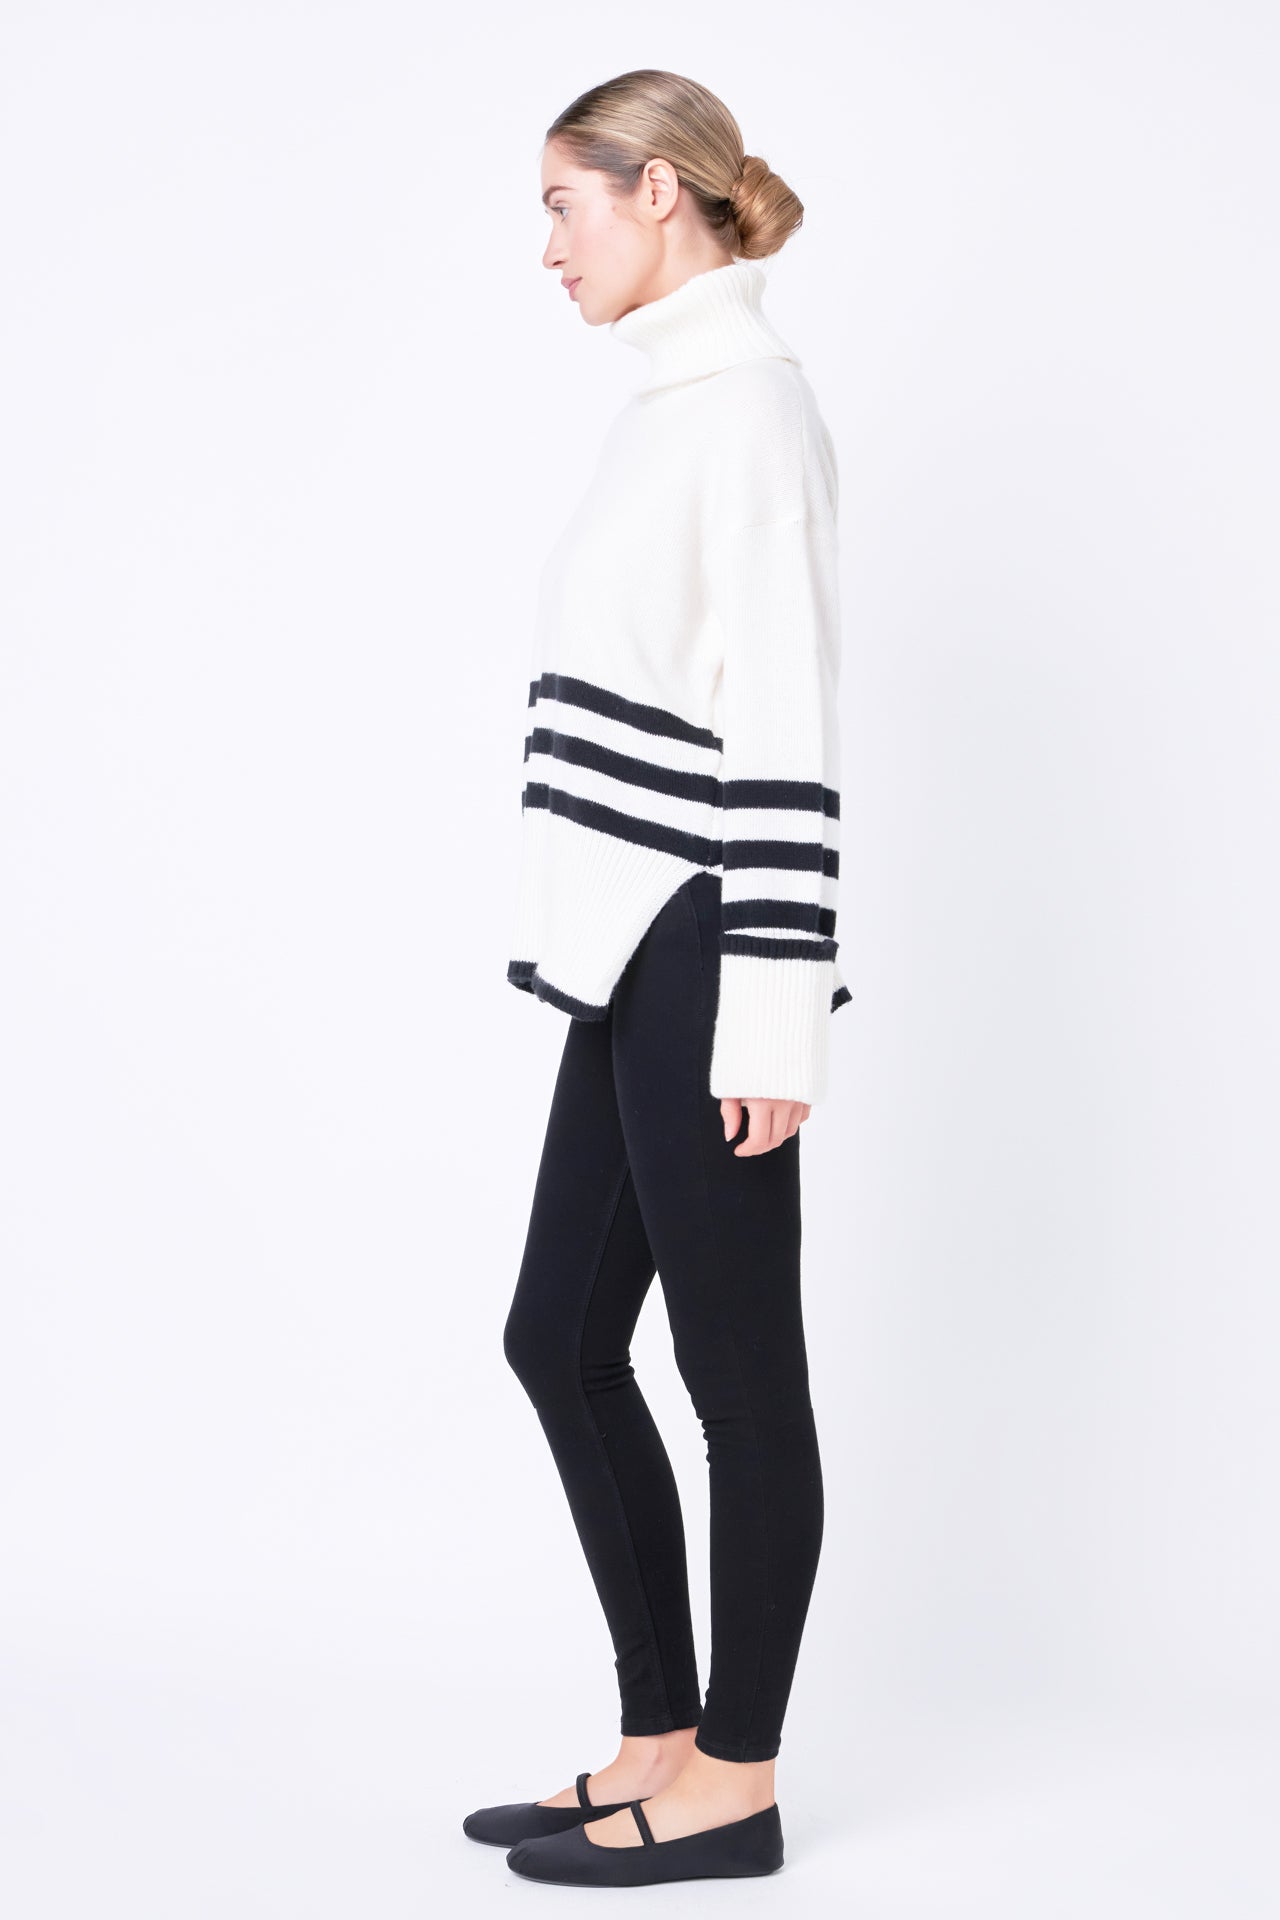 FREE THE ROSES - Striped Turtle Neck Sweater - SWEATERS & KNITS available at Objectrare